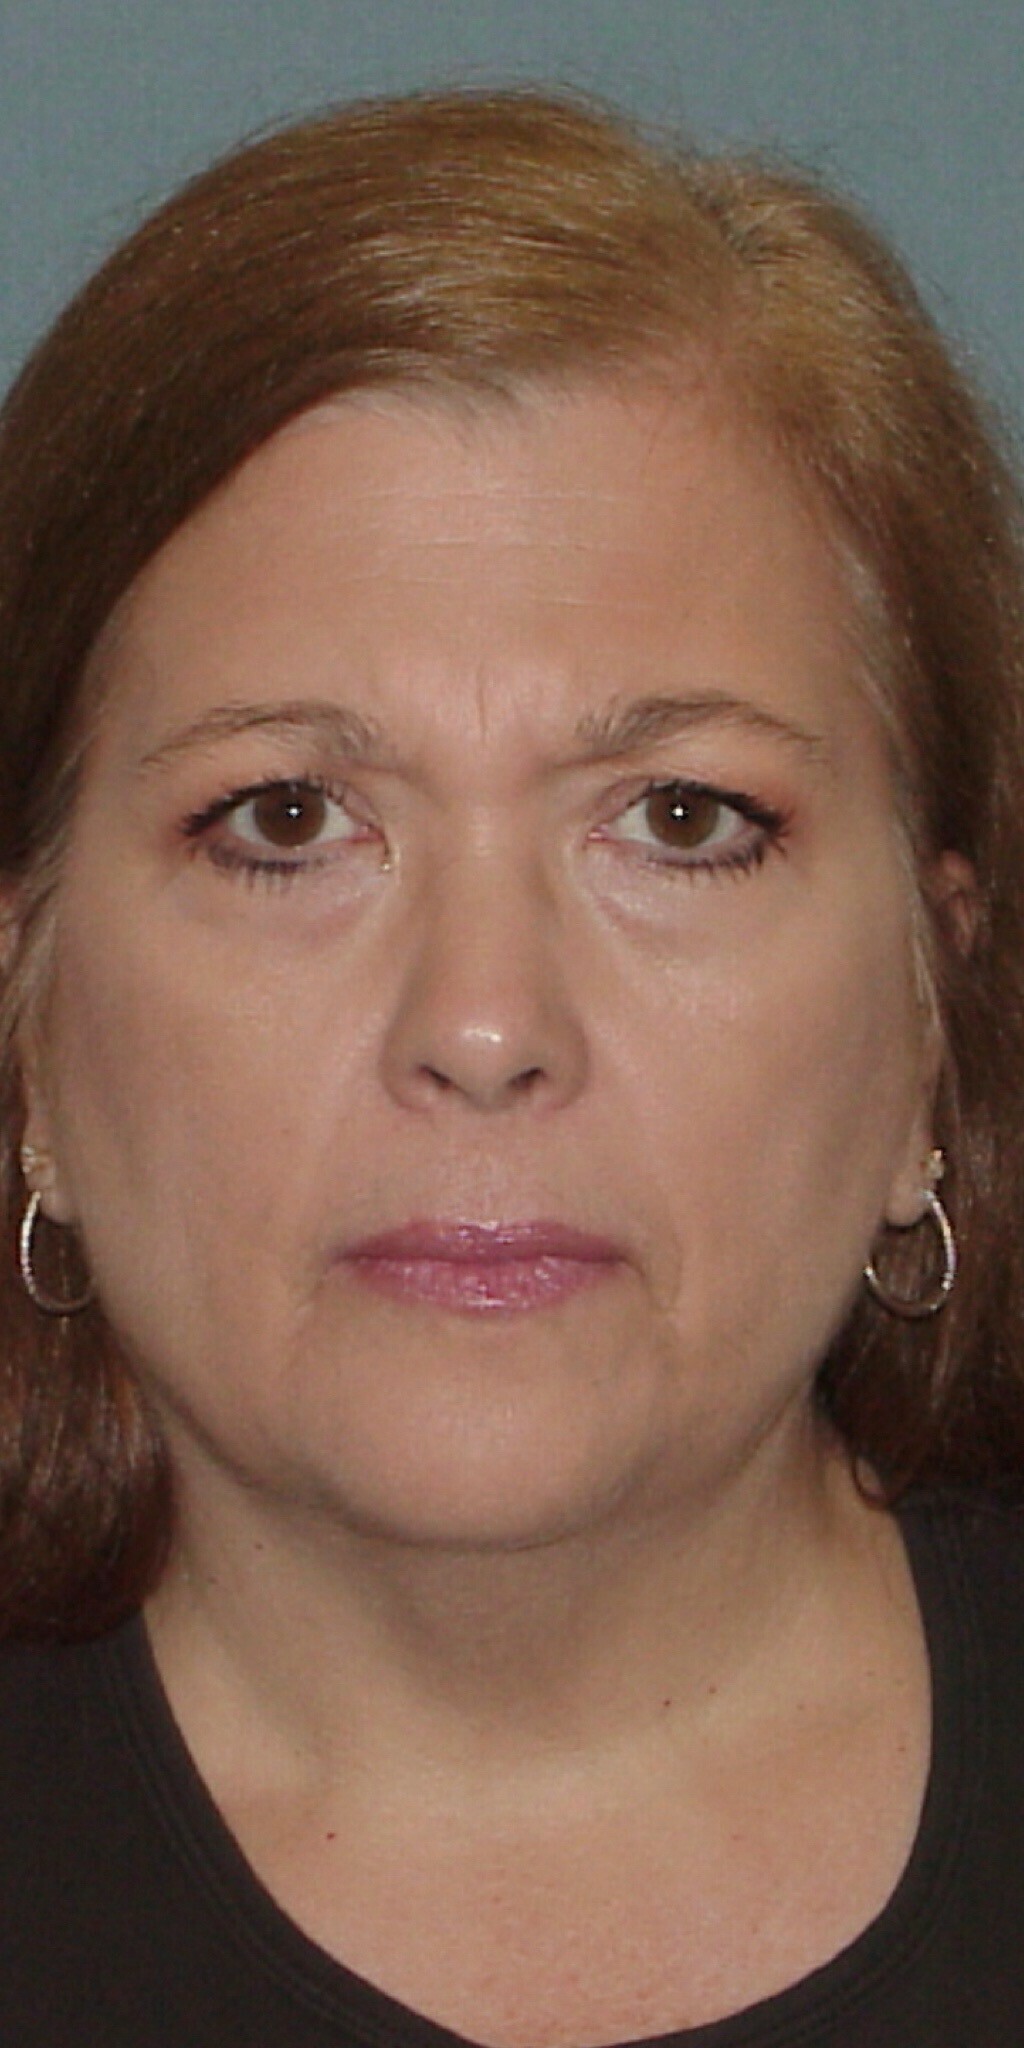 Photo of the patient’s face before the Facelift surgery. Set 1. Patient 2